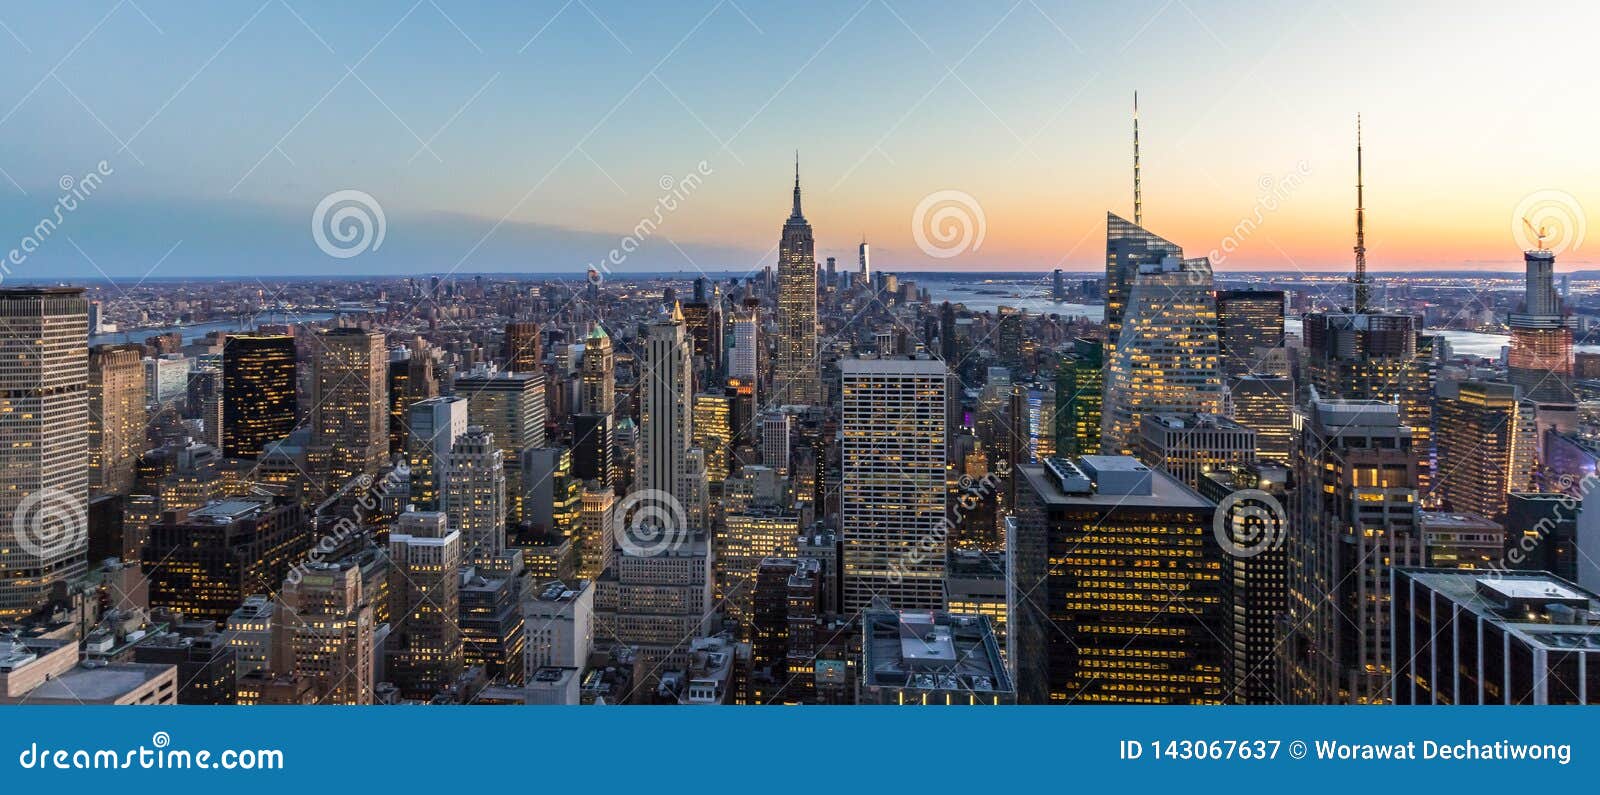 panoramic photo of new york city skyline in manhattan downtown with empire state building and skyscrapers at night usa